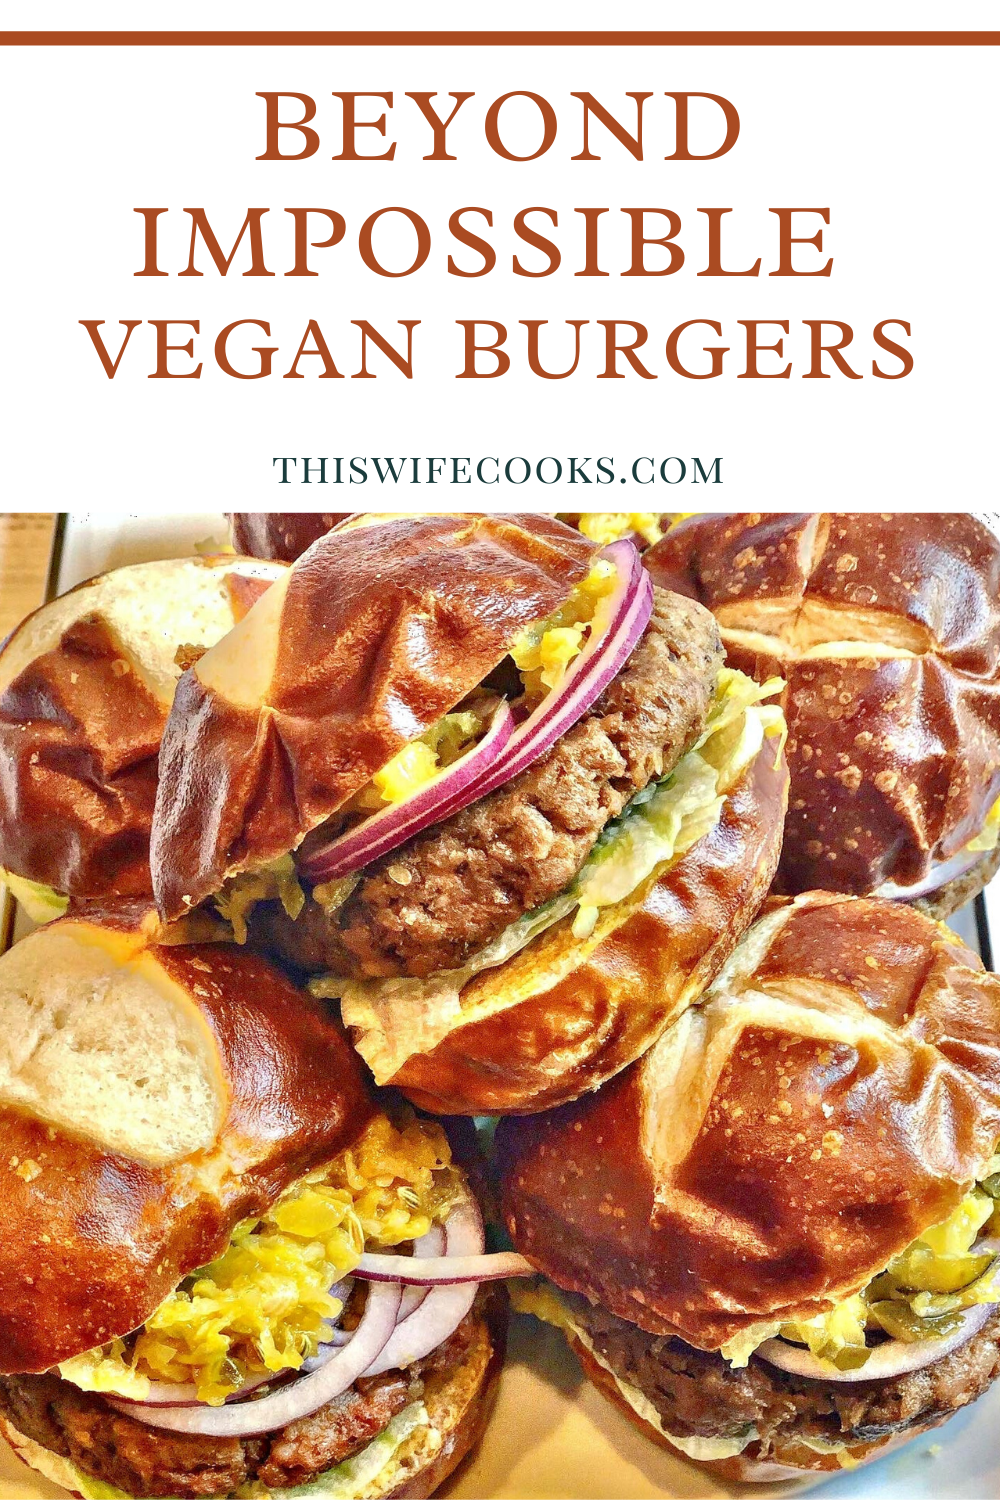 Beyond Impossible Vegan Burgers and Sliders - This recipe yields 6 thick pub-style burgers or 12 hearty sliders. Perfect for cookouts or tailgating, these 100% plant-based burgers will satisfy even the most hardcore carnivores in the crowd. via @thiswifecooks